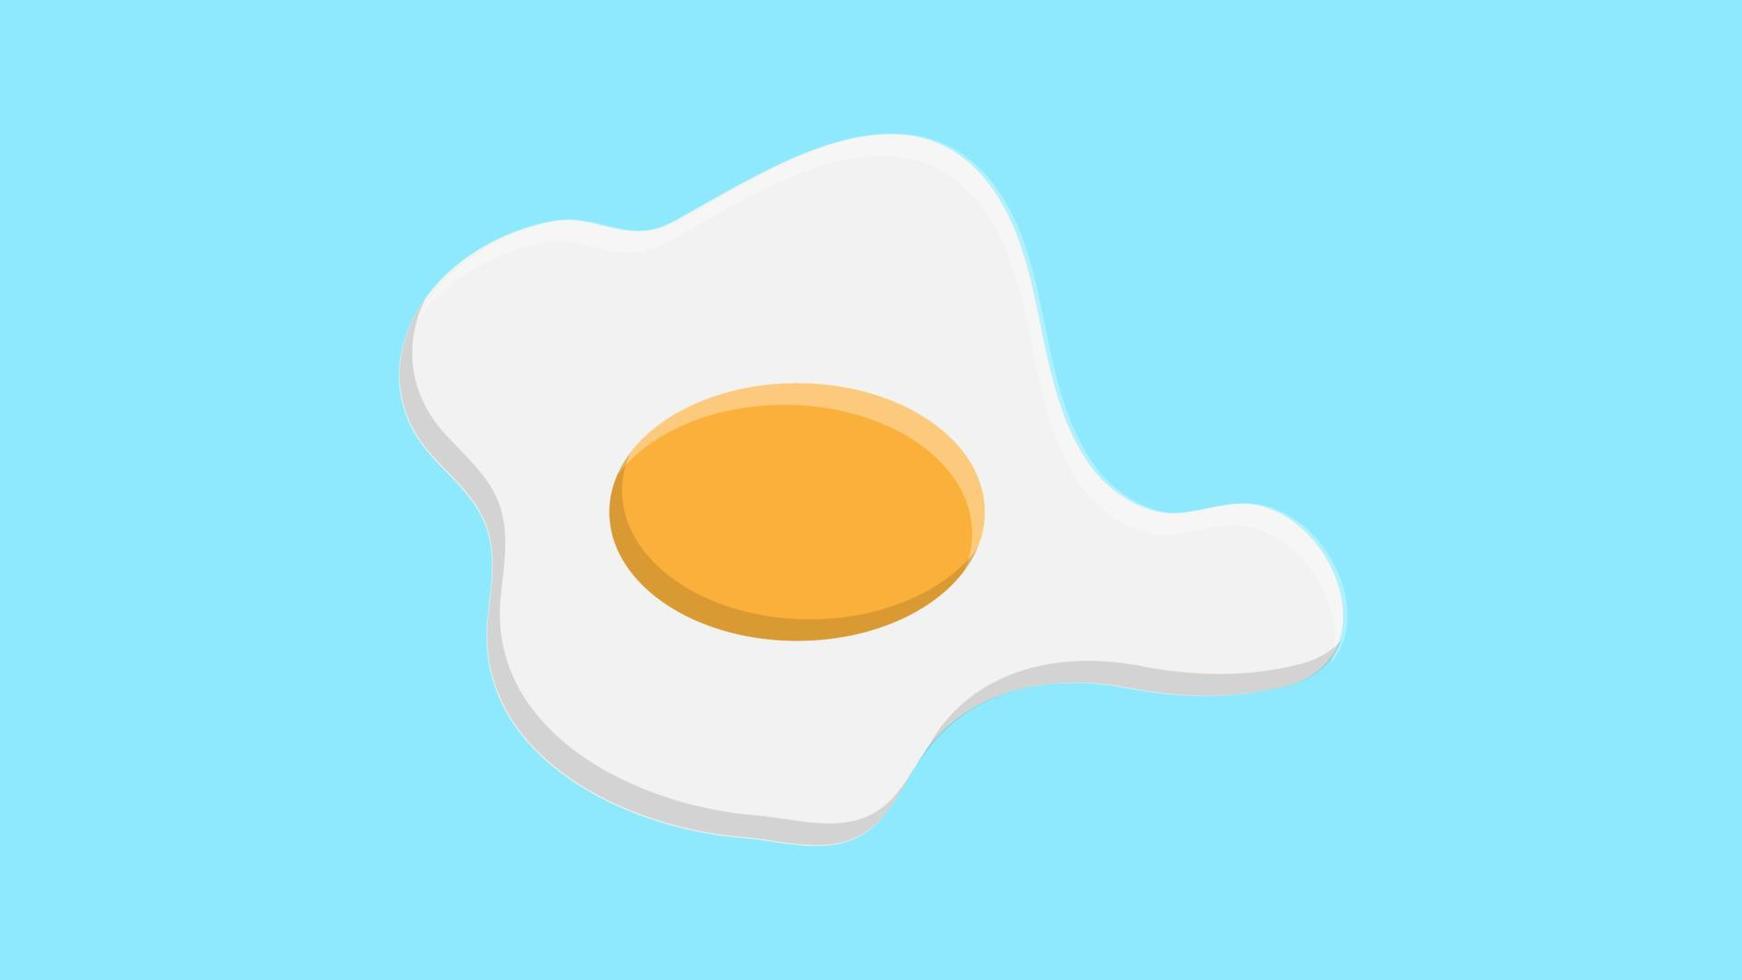 scrambled eggs on a blue background, vector illustration. egg with yellow yolk. delicious breakfast. fried eggs with white protein. fried egg for english breakfast treat